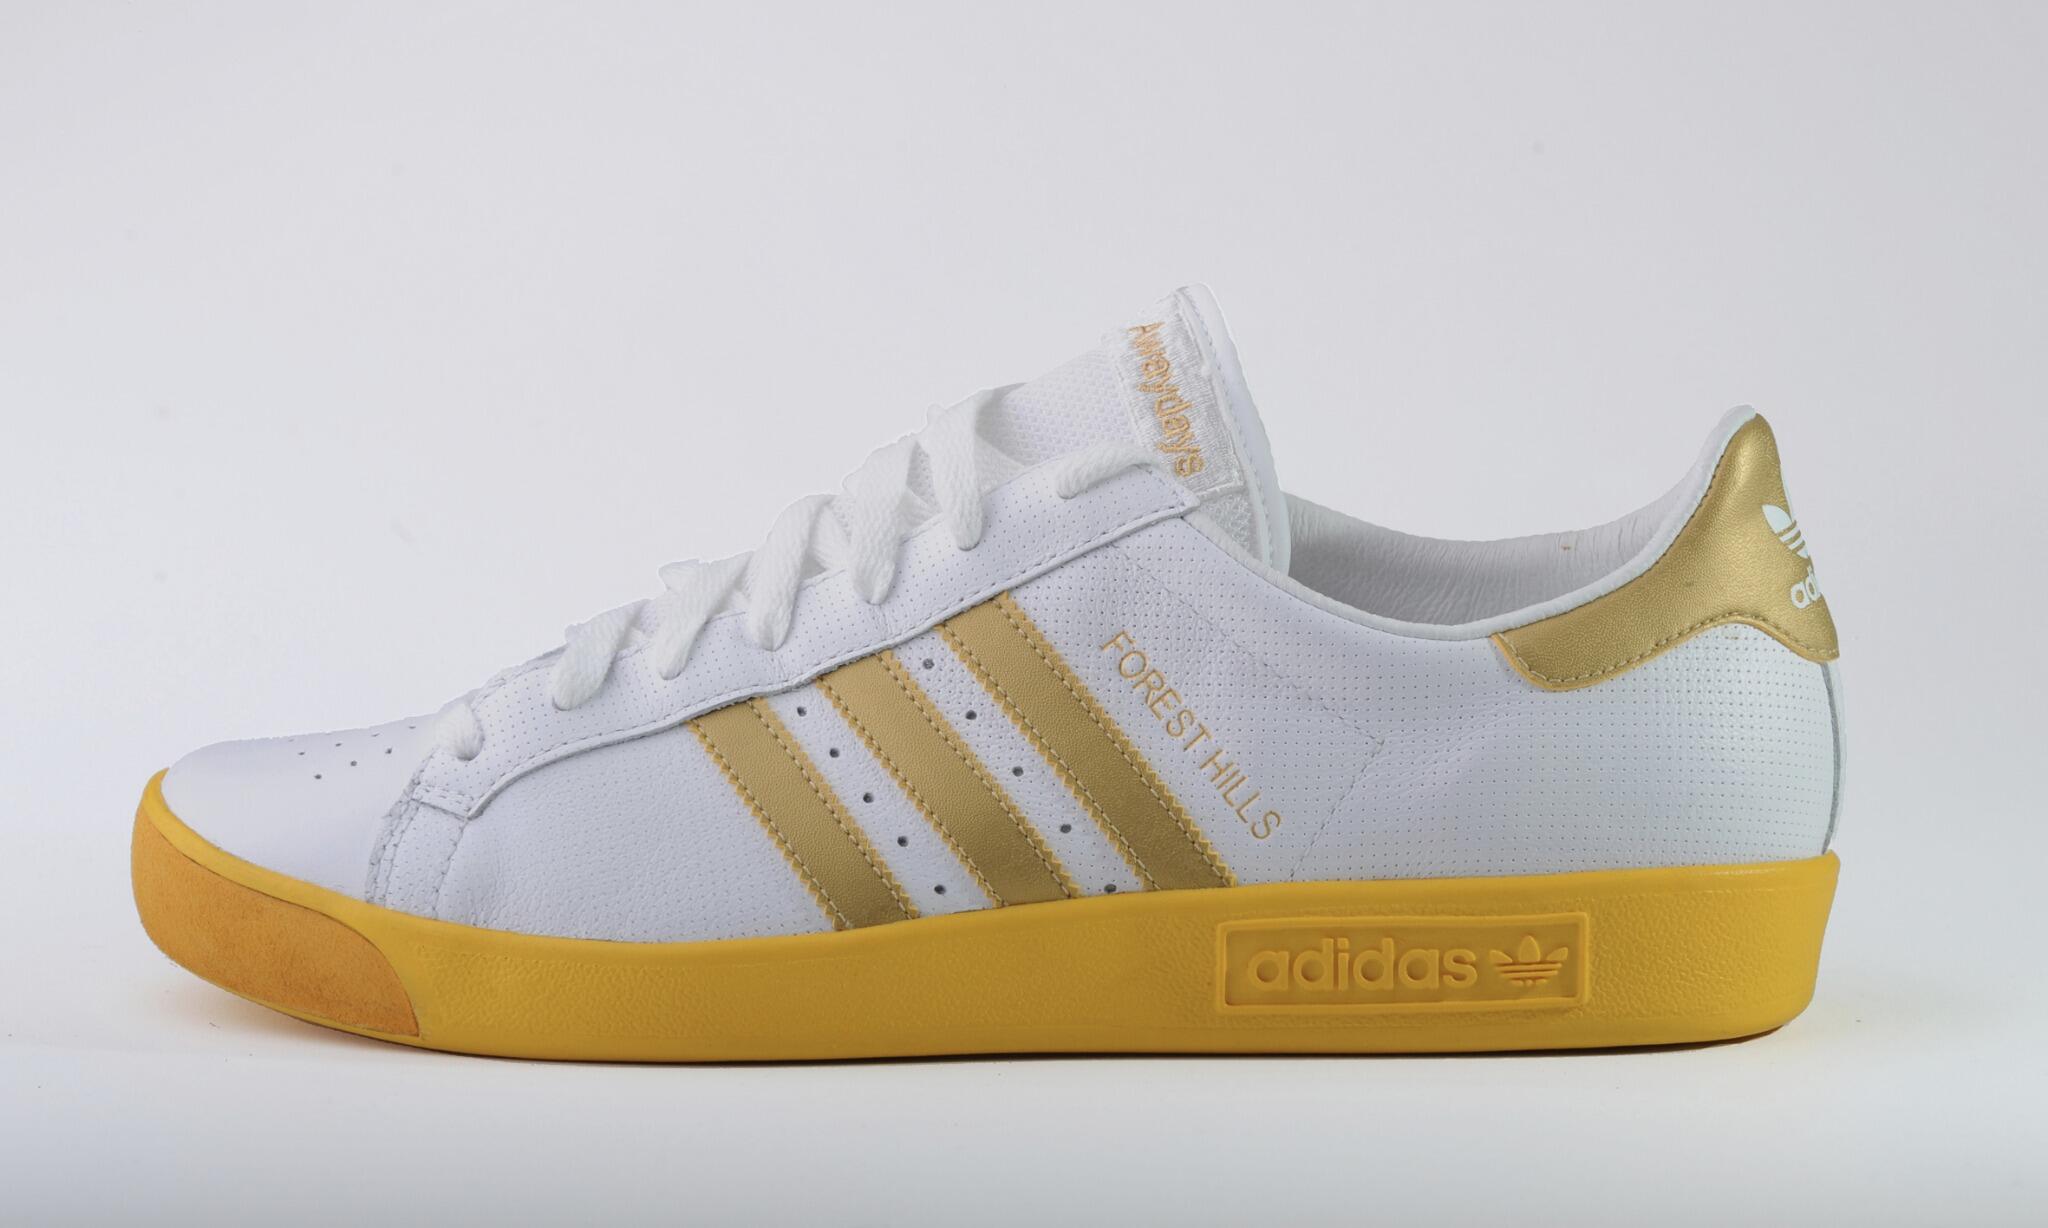 Inaccesible Dependencia Residente adidas UK on Twitter: "These limited edition Forrest Hills were produced  for the film Awaydays. Only 100 made! Anyone got a pair? #spezial  http://t.co/gN13ZhCYYS" / Twitter